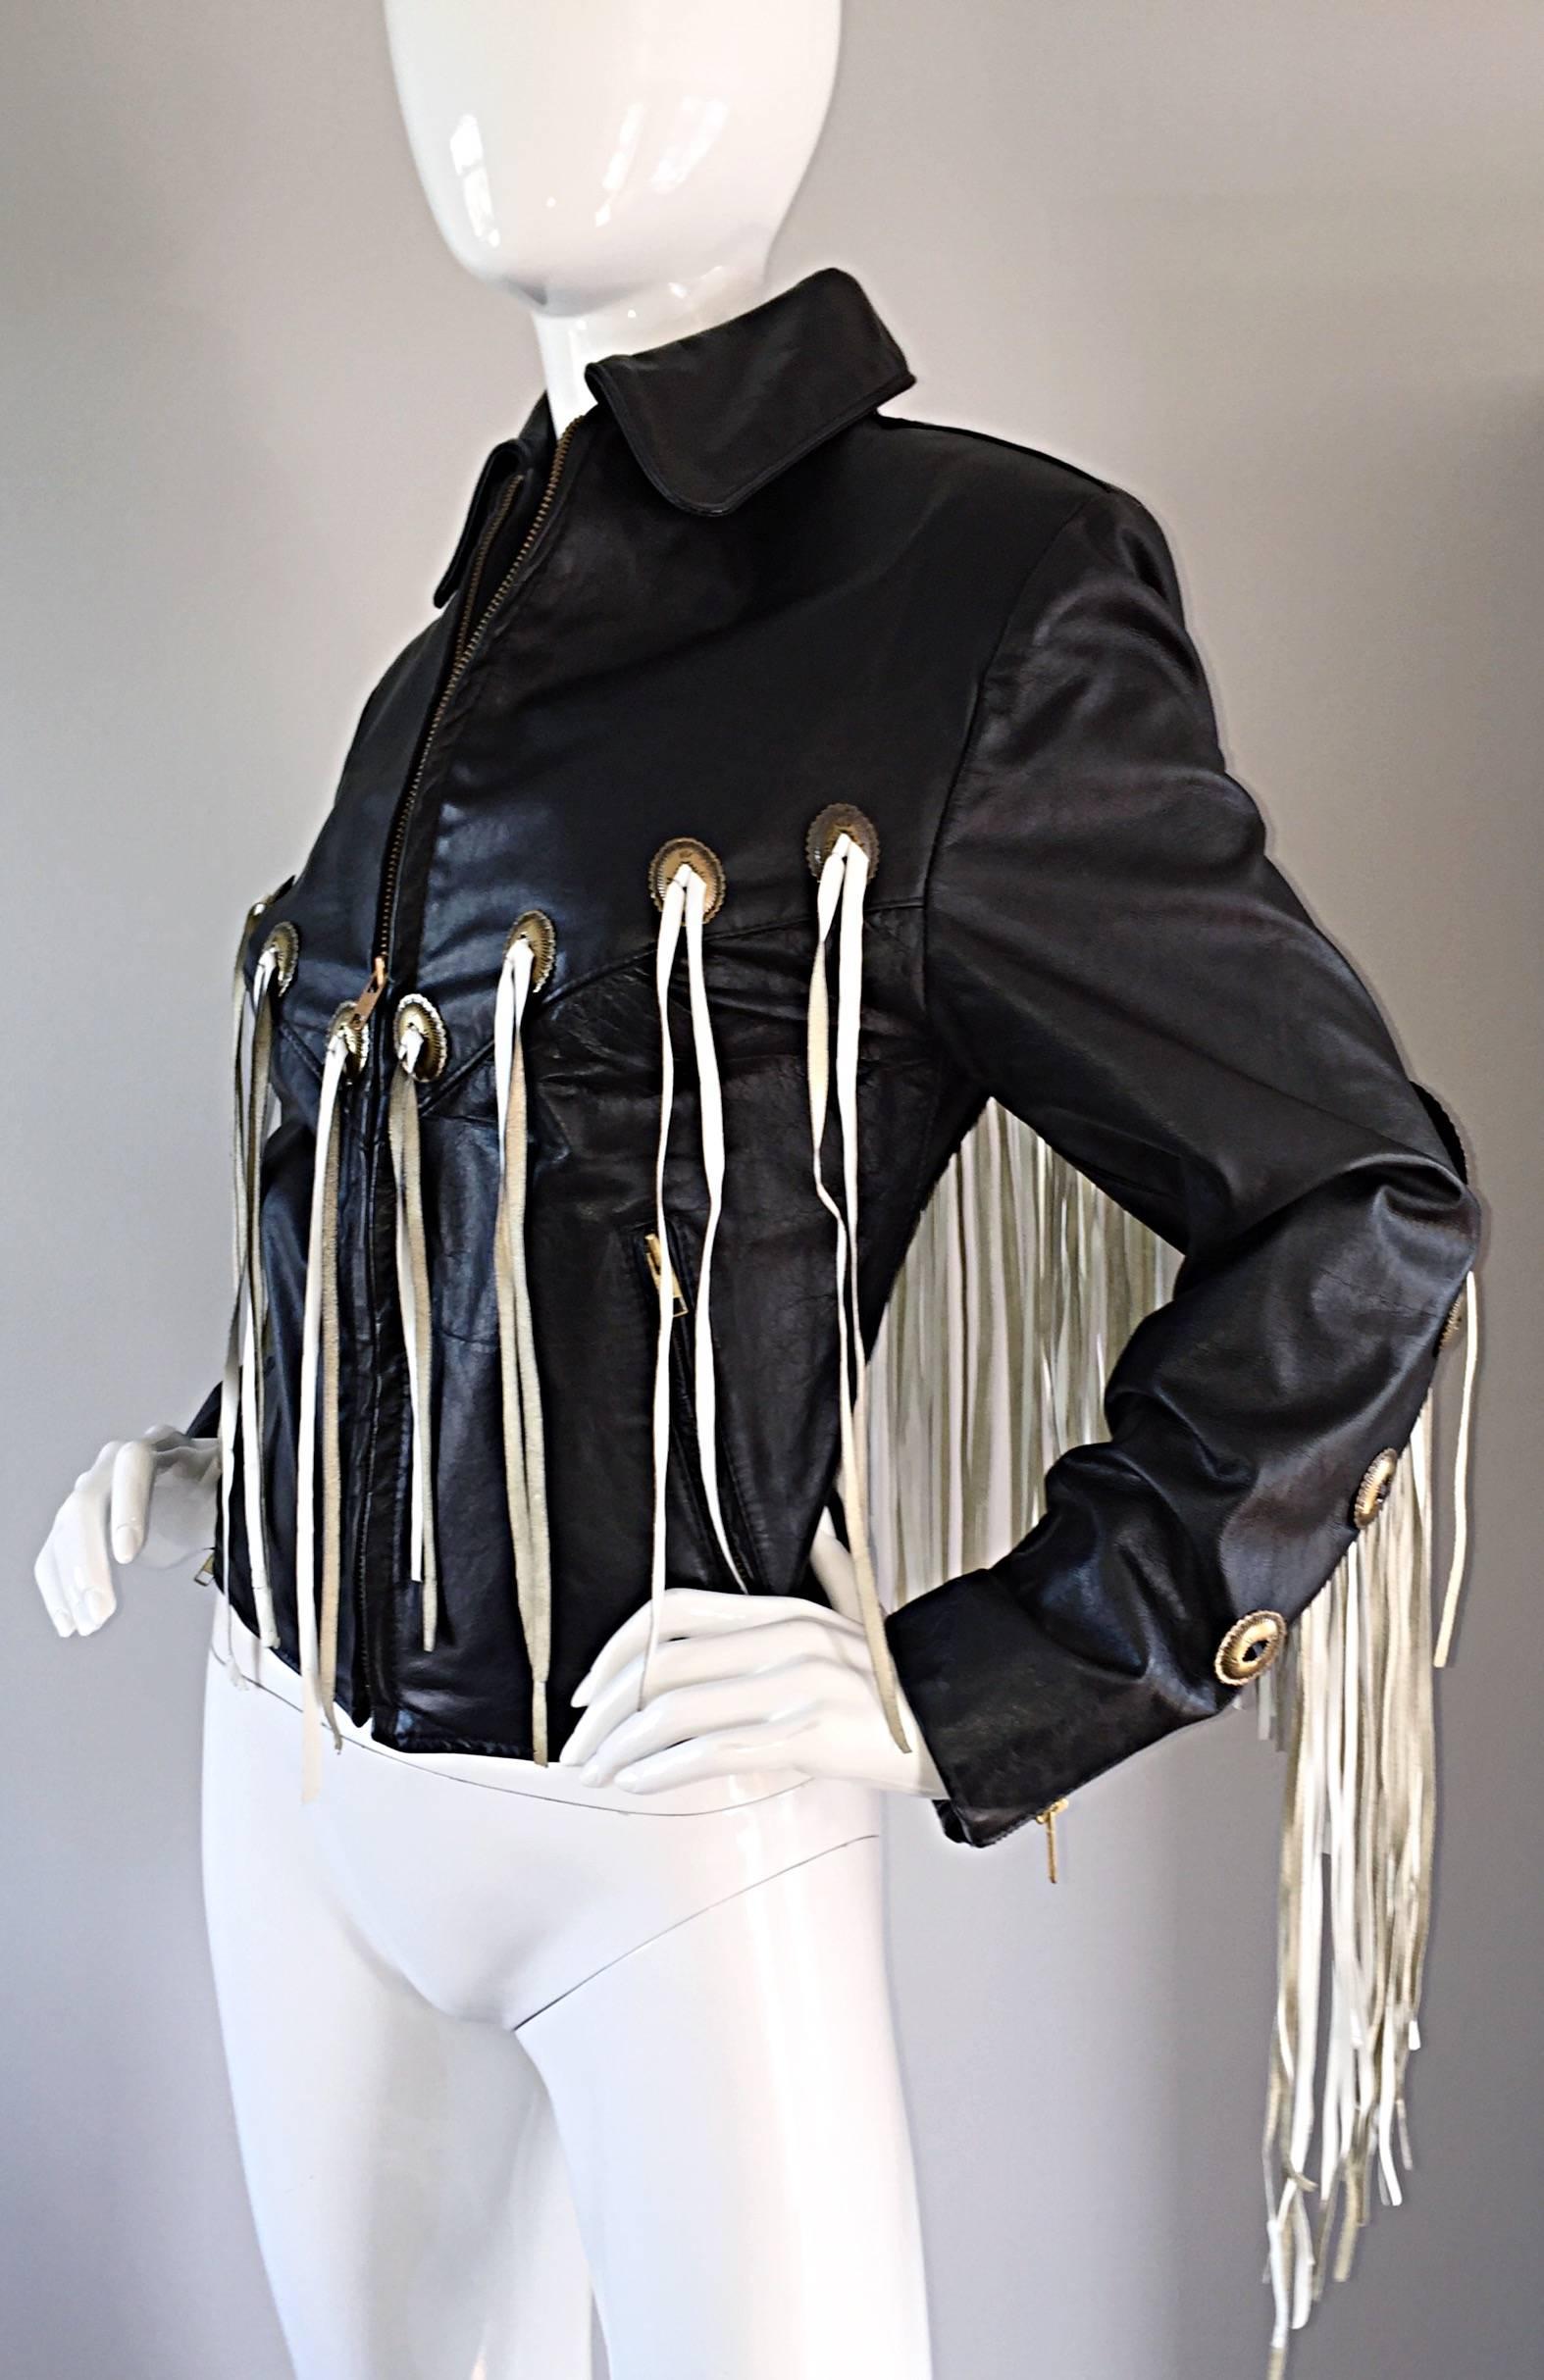 Amazing vintage black leather jacket, with white fringe throughout the front and back! Embellished with brass plates, also on both the front and back. Zips up the bodice. Looks so great on...literally sways with every move, but not in an annoying